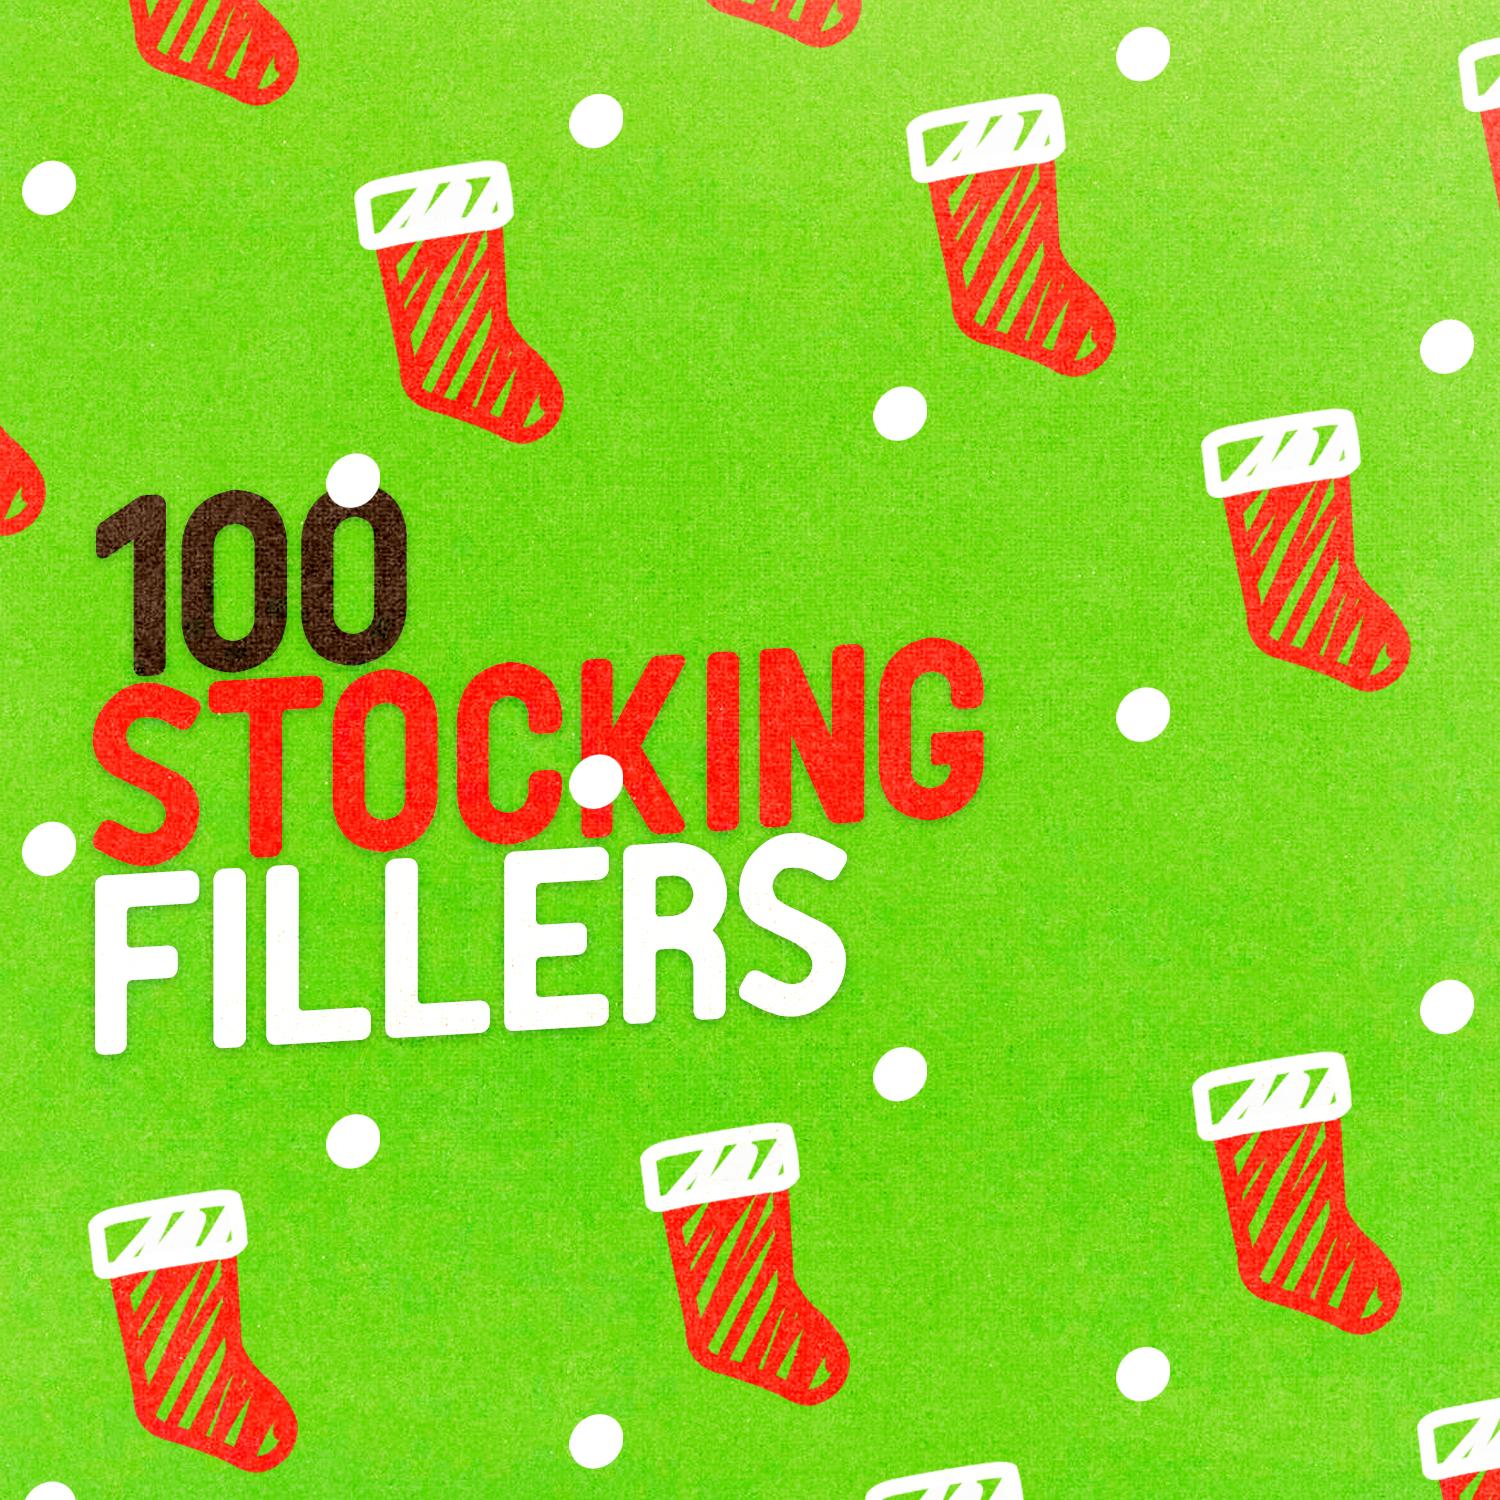 100 Stocking Fillers